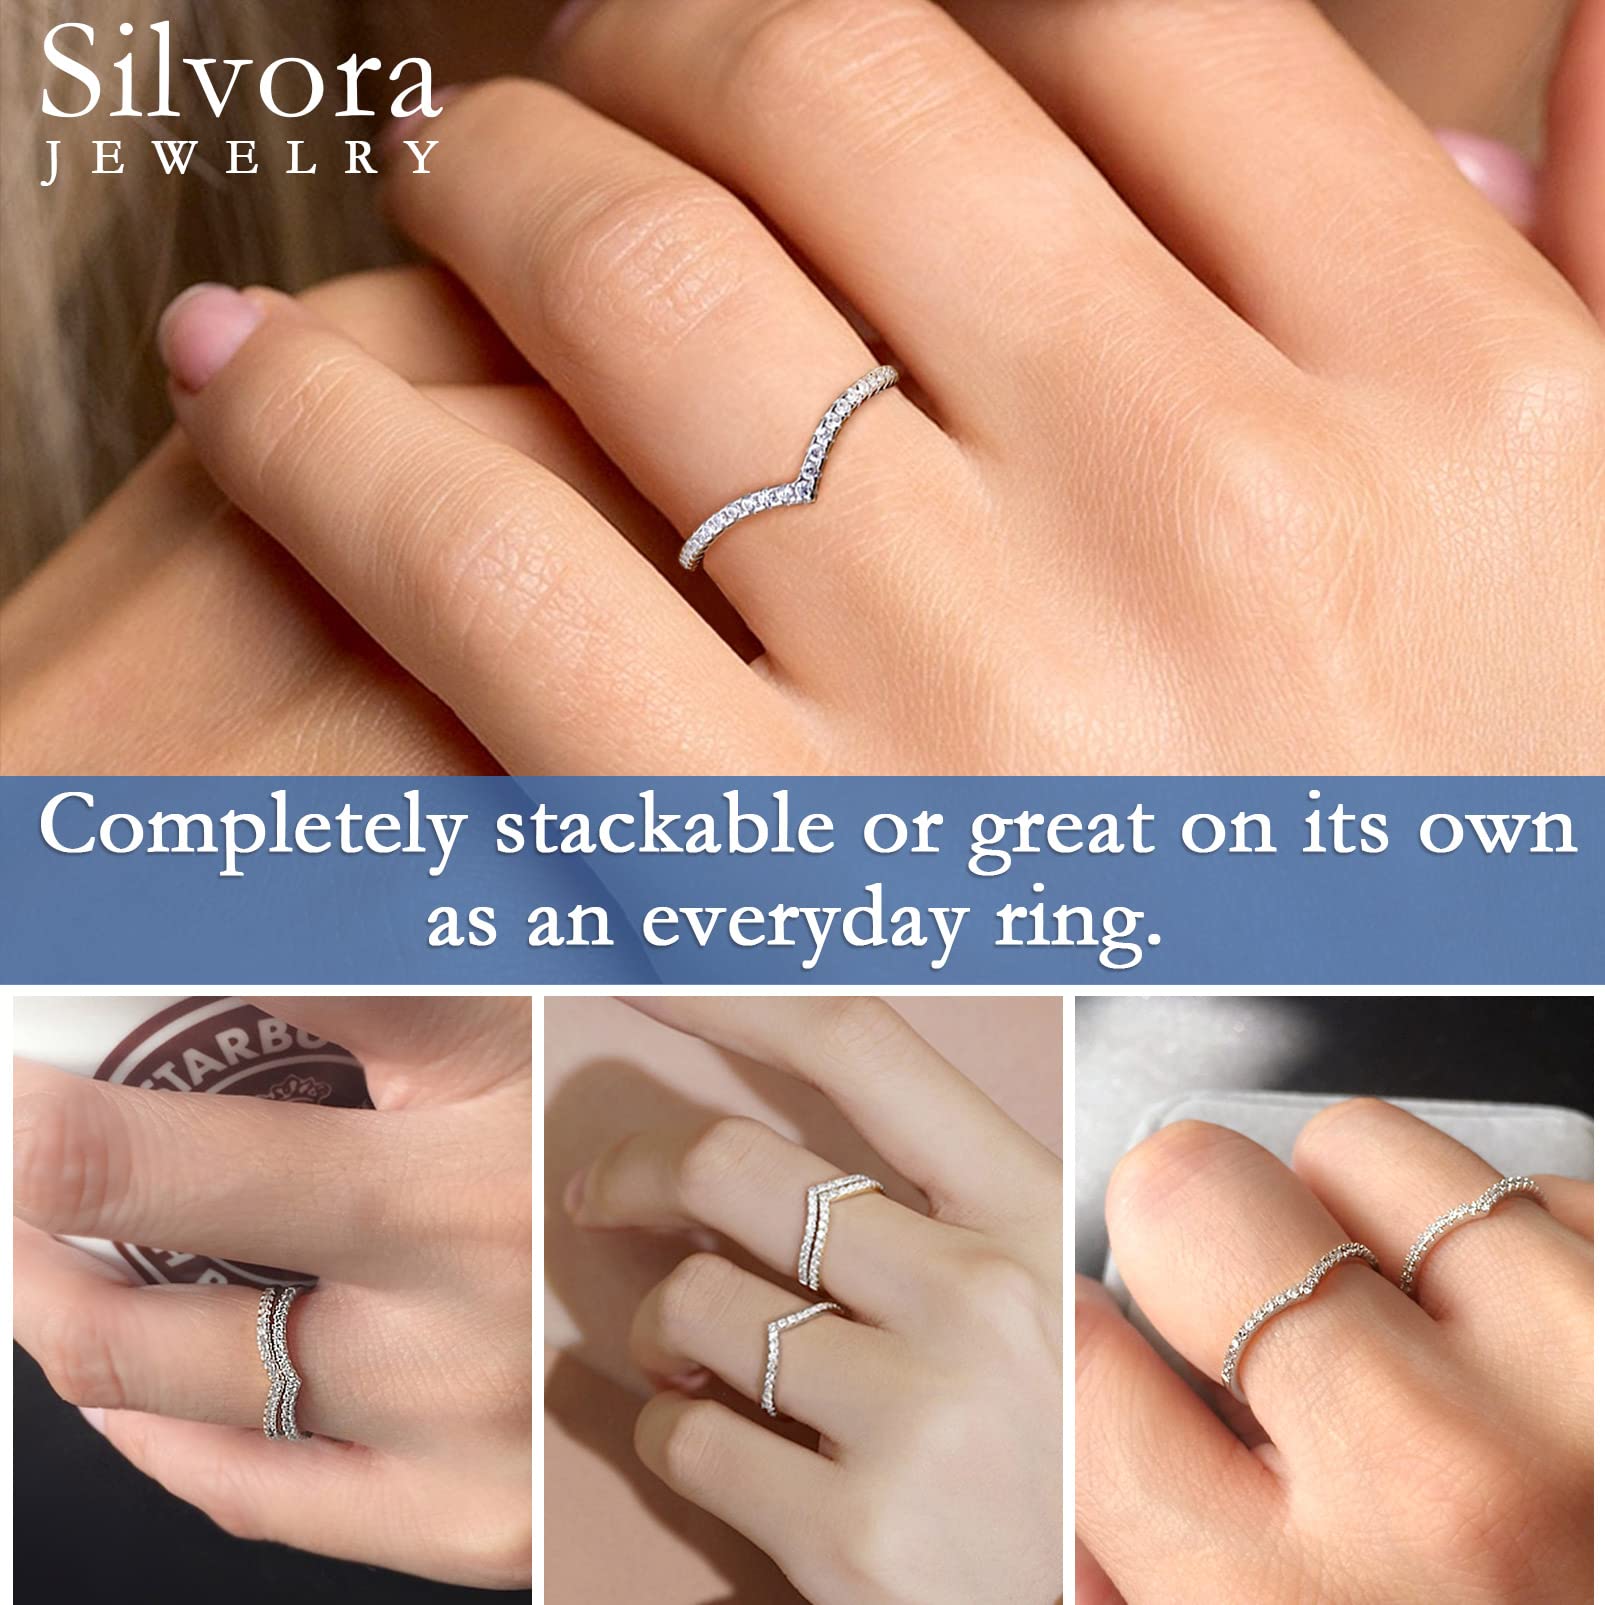 Silvora Sterling Silver Stacking Wishbone Rings for Women Teen Girls, Wedding Band Jewelry with Delicate Gift Packaging, Customizable